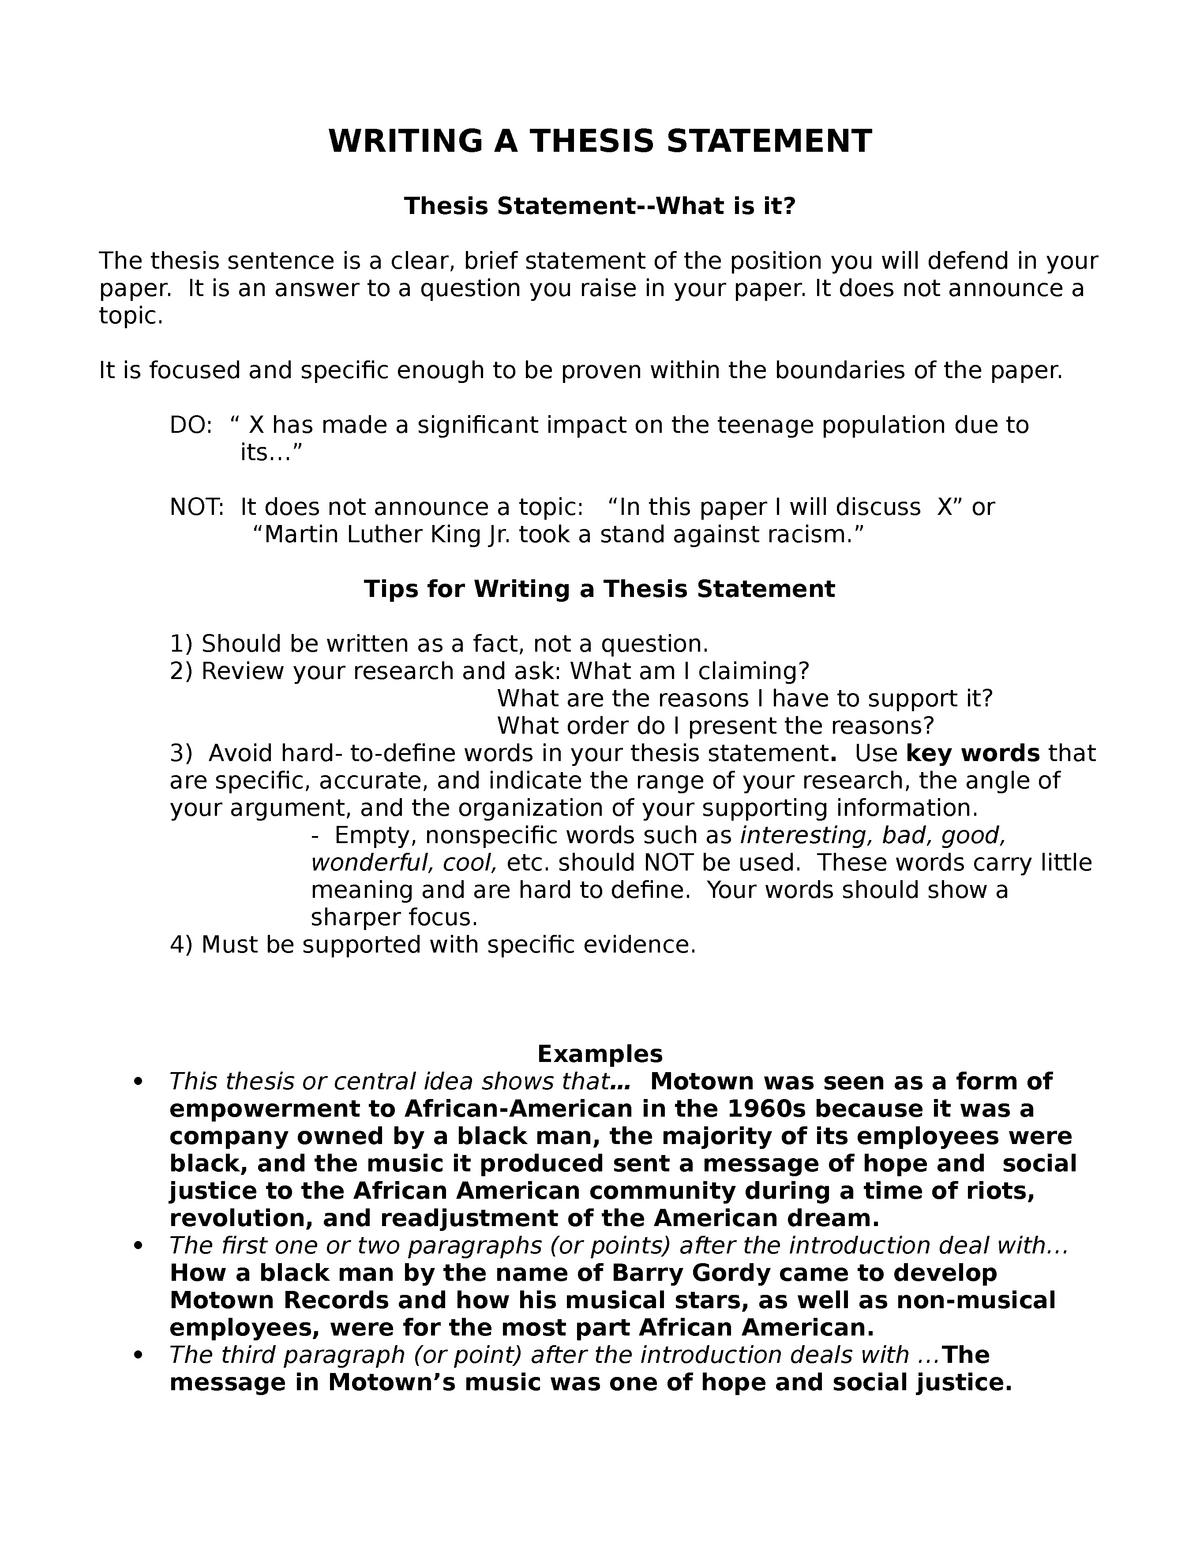 Writing thesis statement - WRITING A THESIS STATEMENT Thesis Statement ...